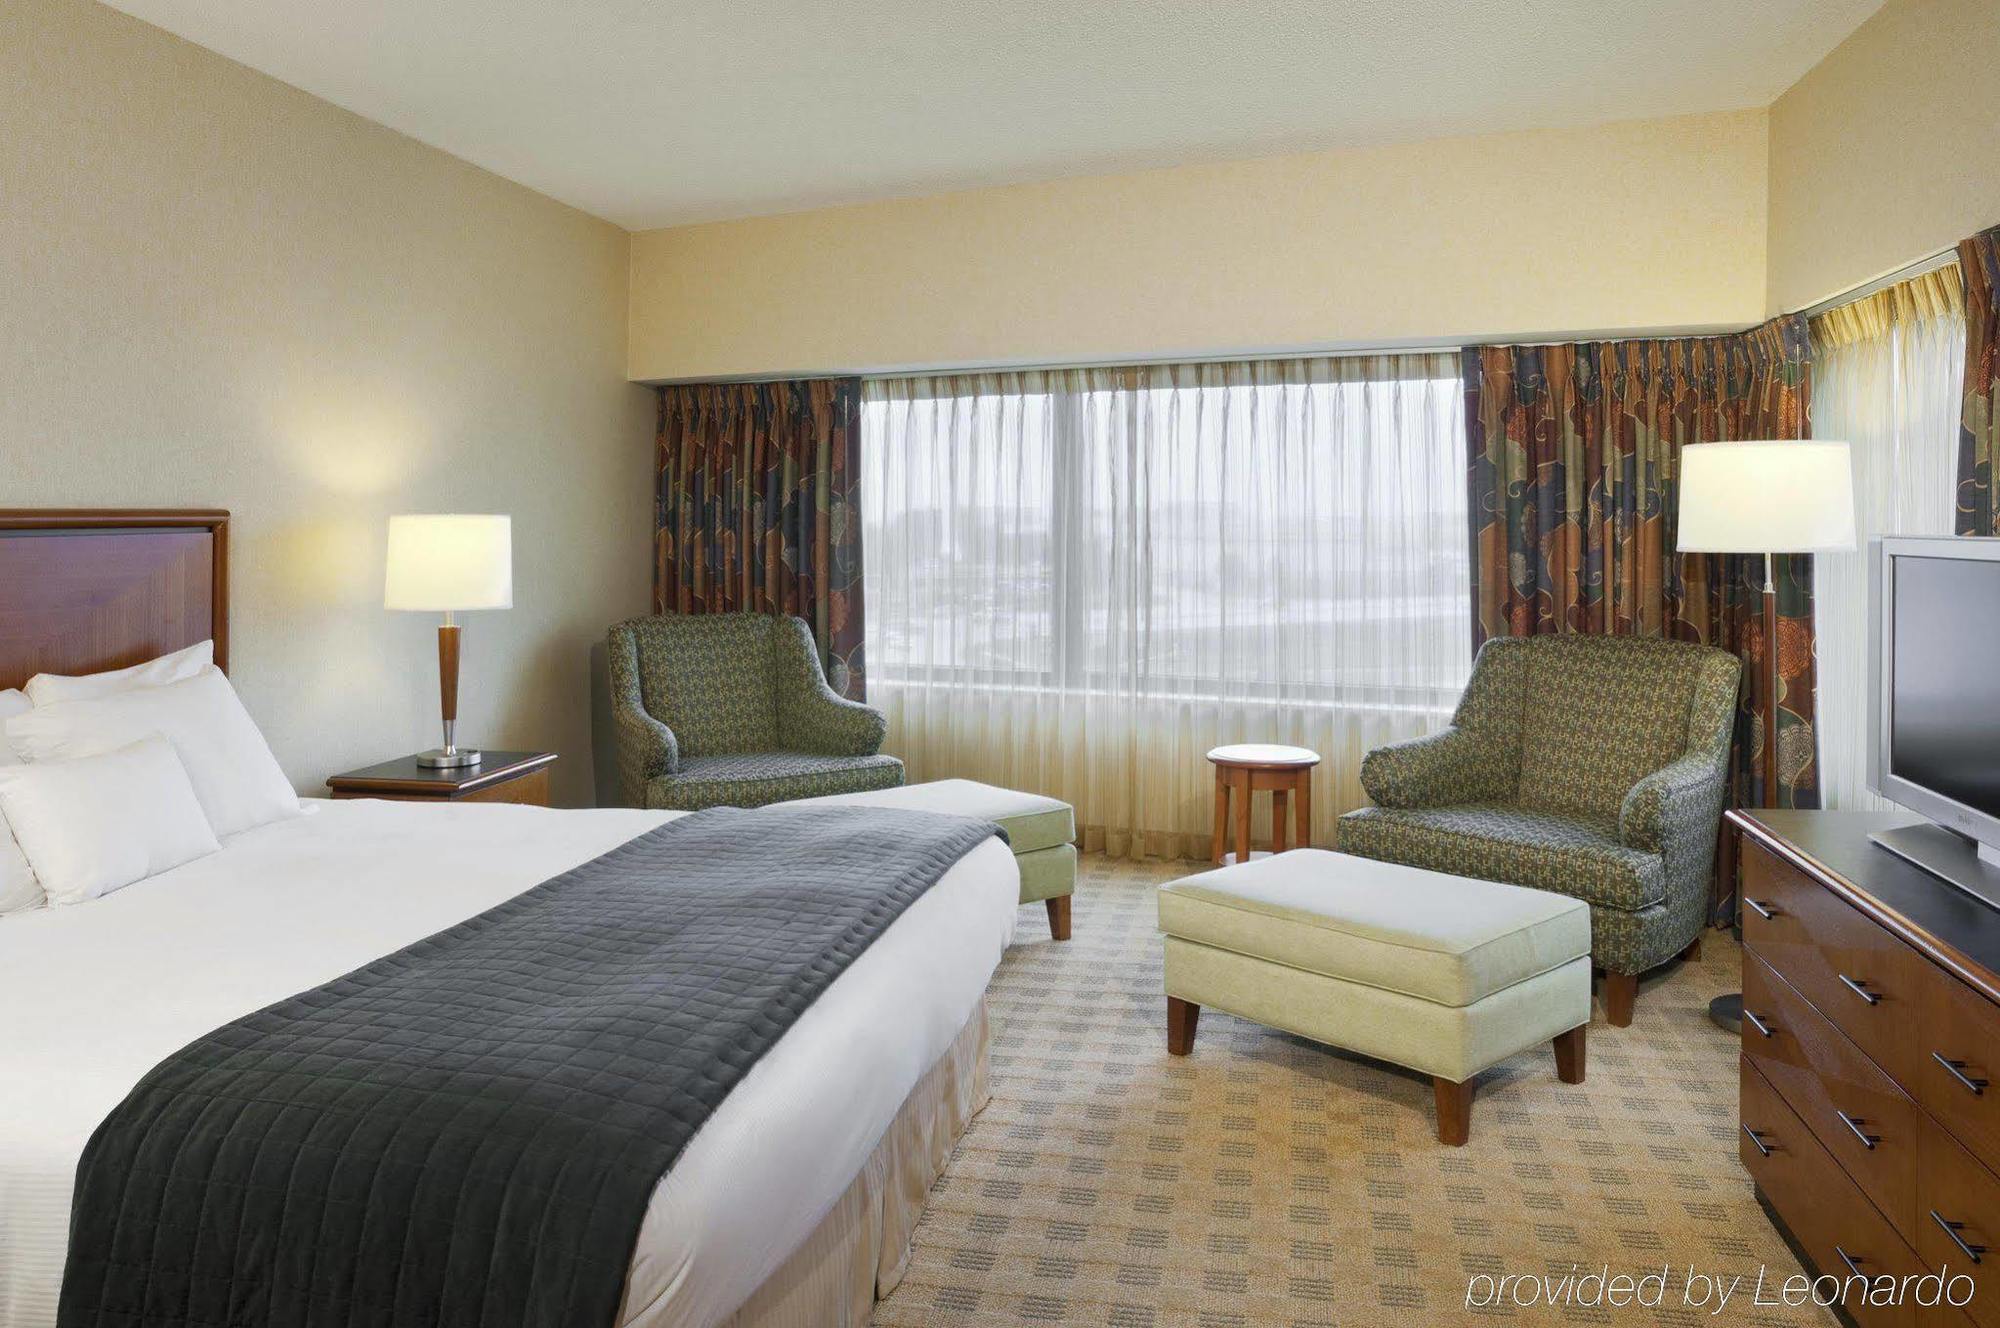 Doubletree Suites By Hilton Hotel & Conference Center Chicago-Downers Grove Habitación foto